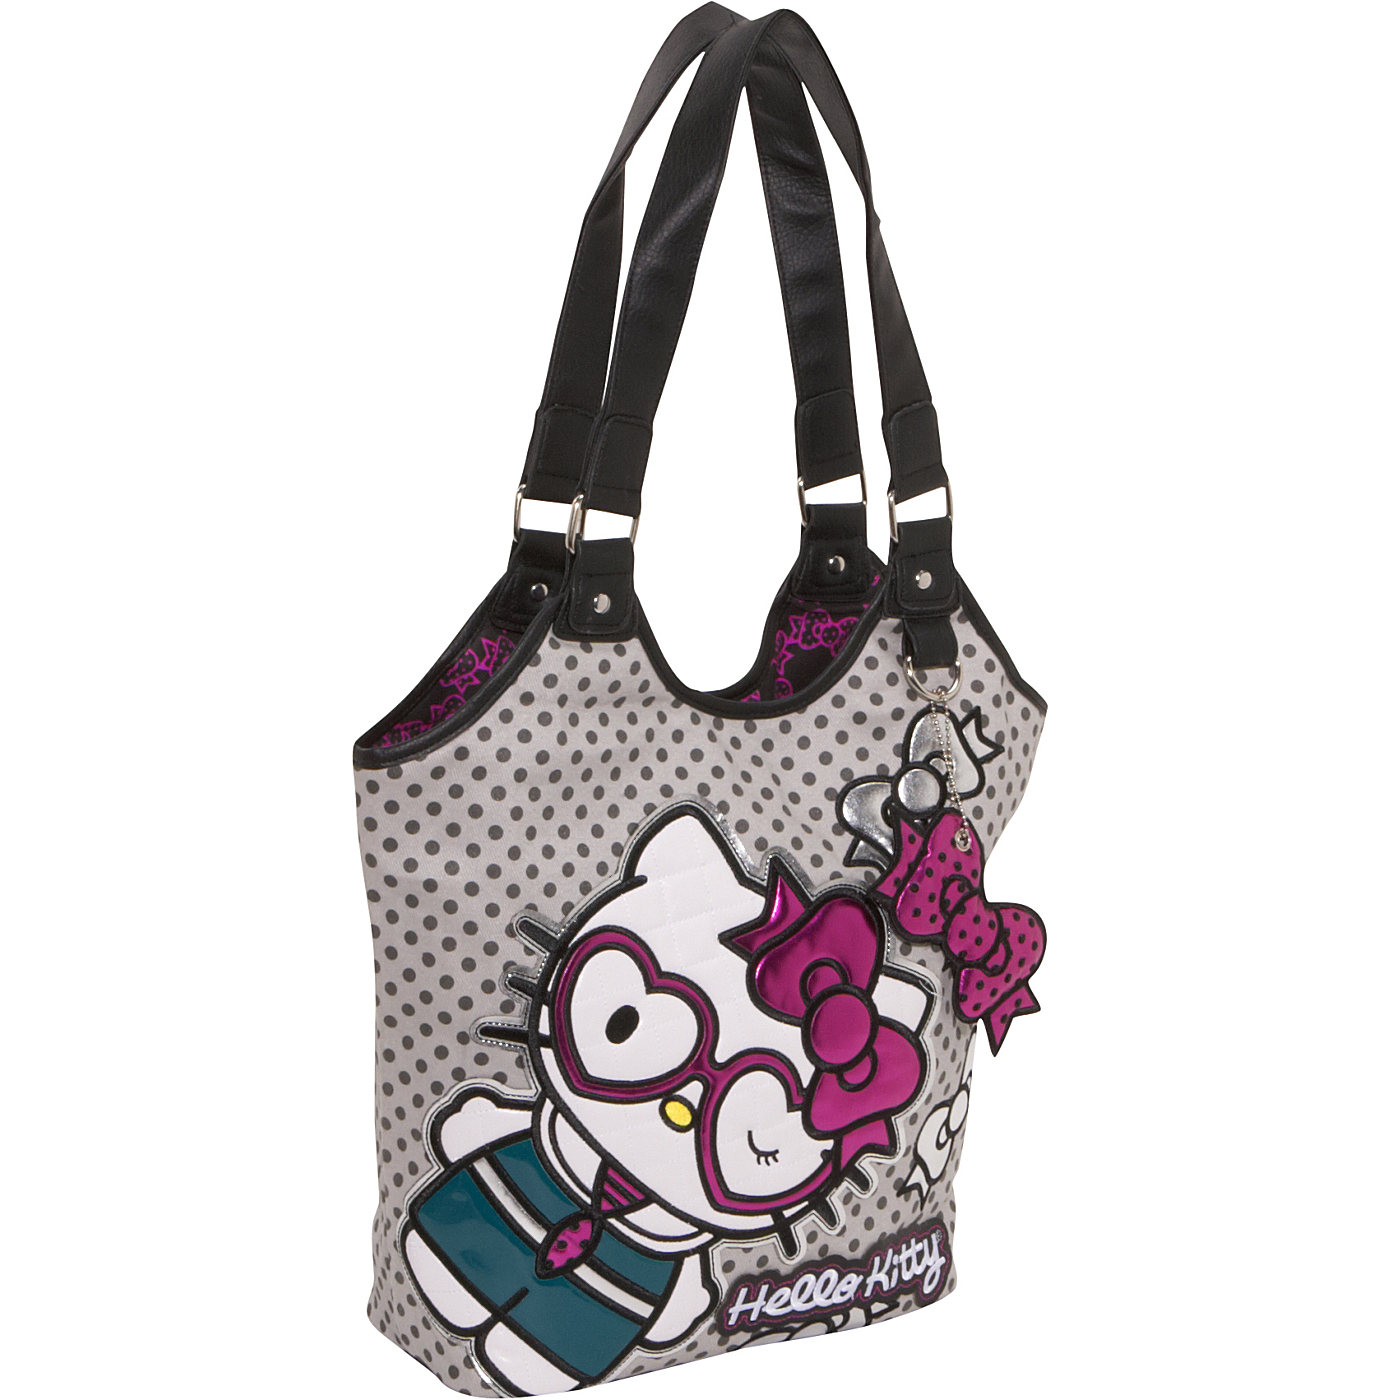   100 % recommended loungefly hello kitty mustache coin bag $ 17 00